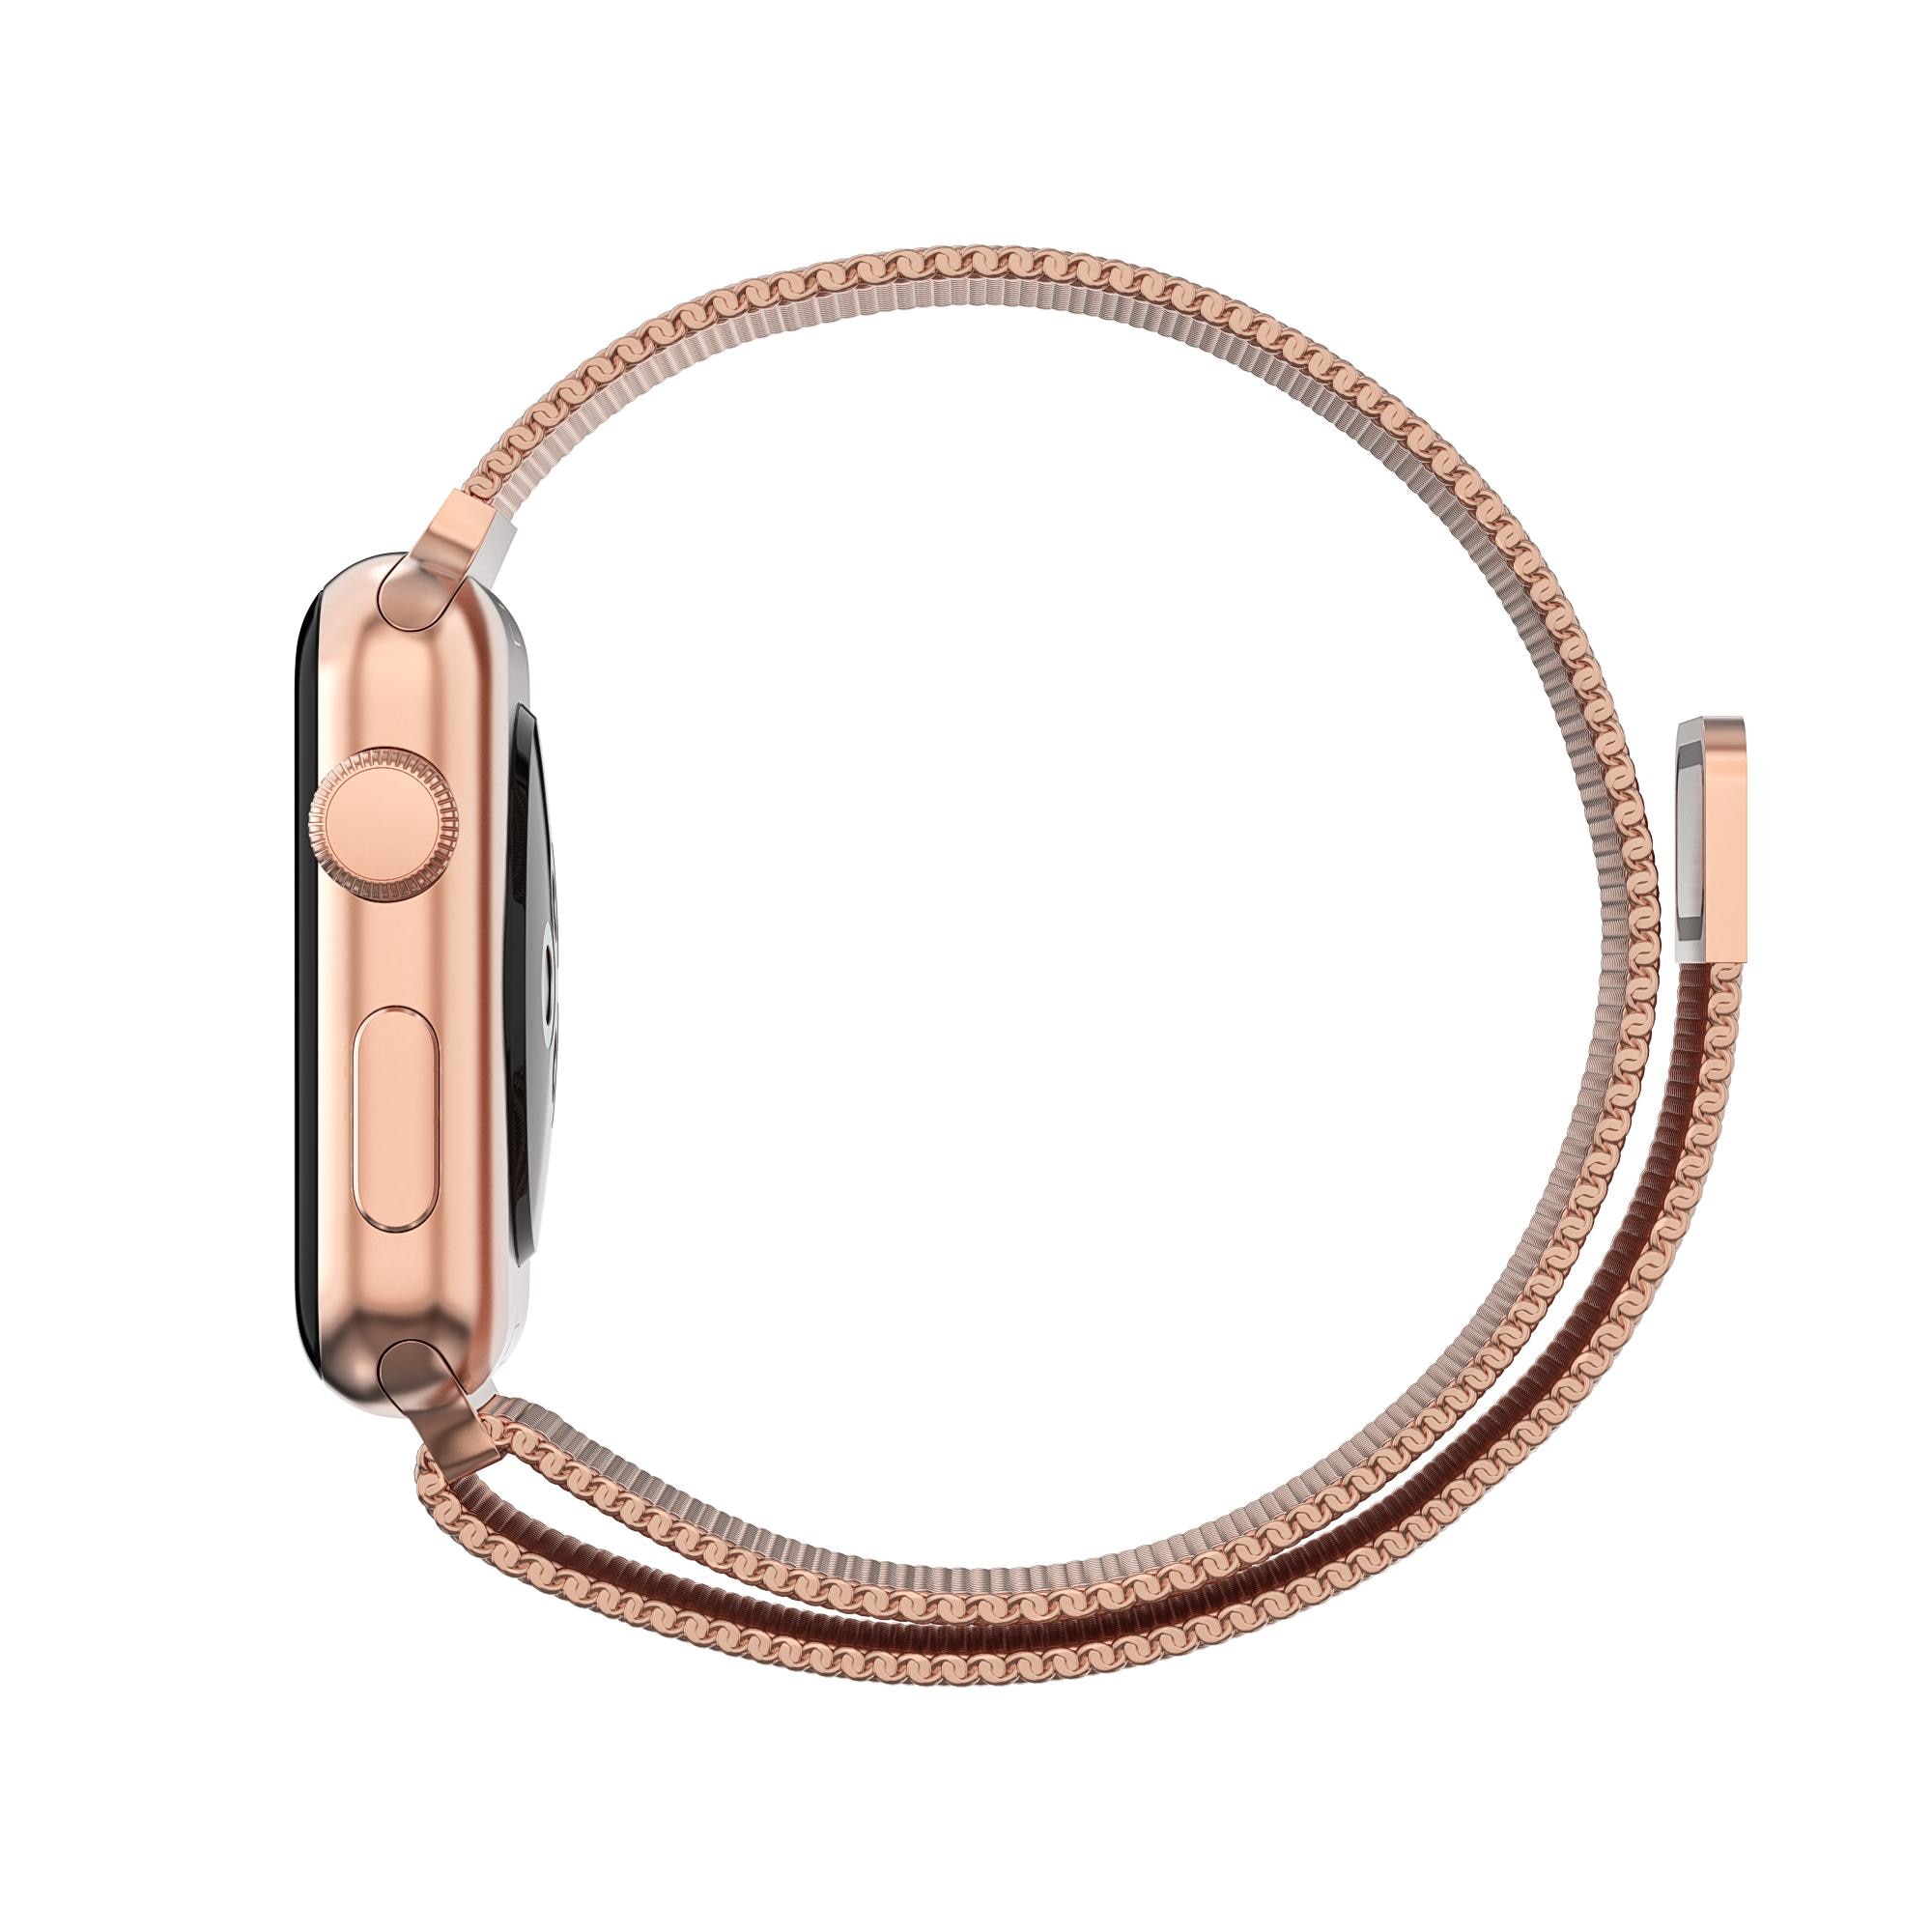 Apple Watch 44mm Milanese Loop Band Rose Gold